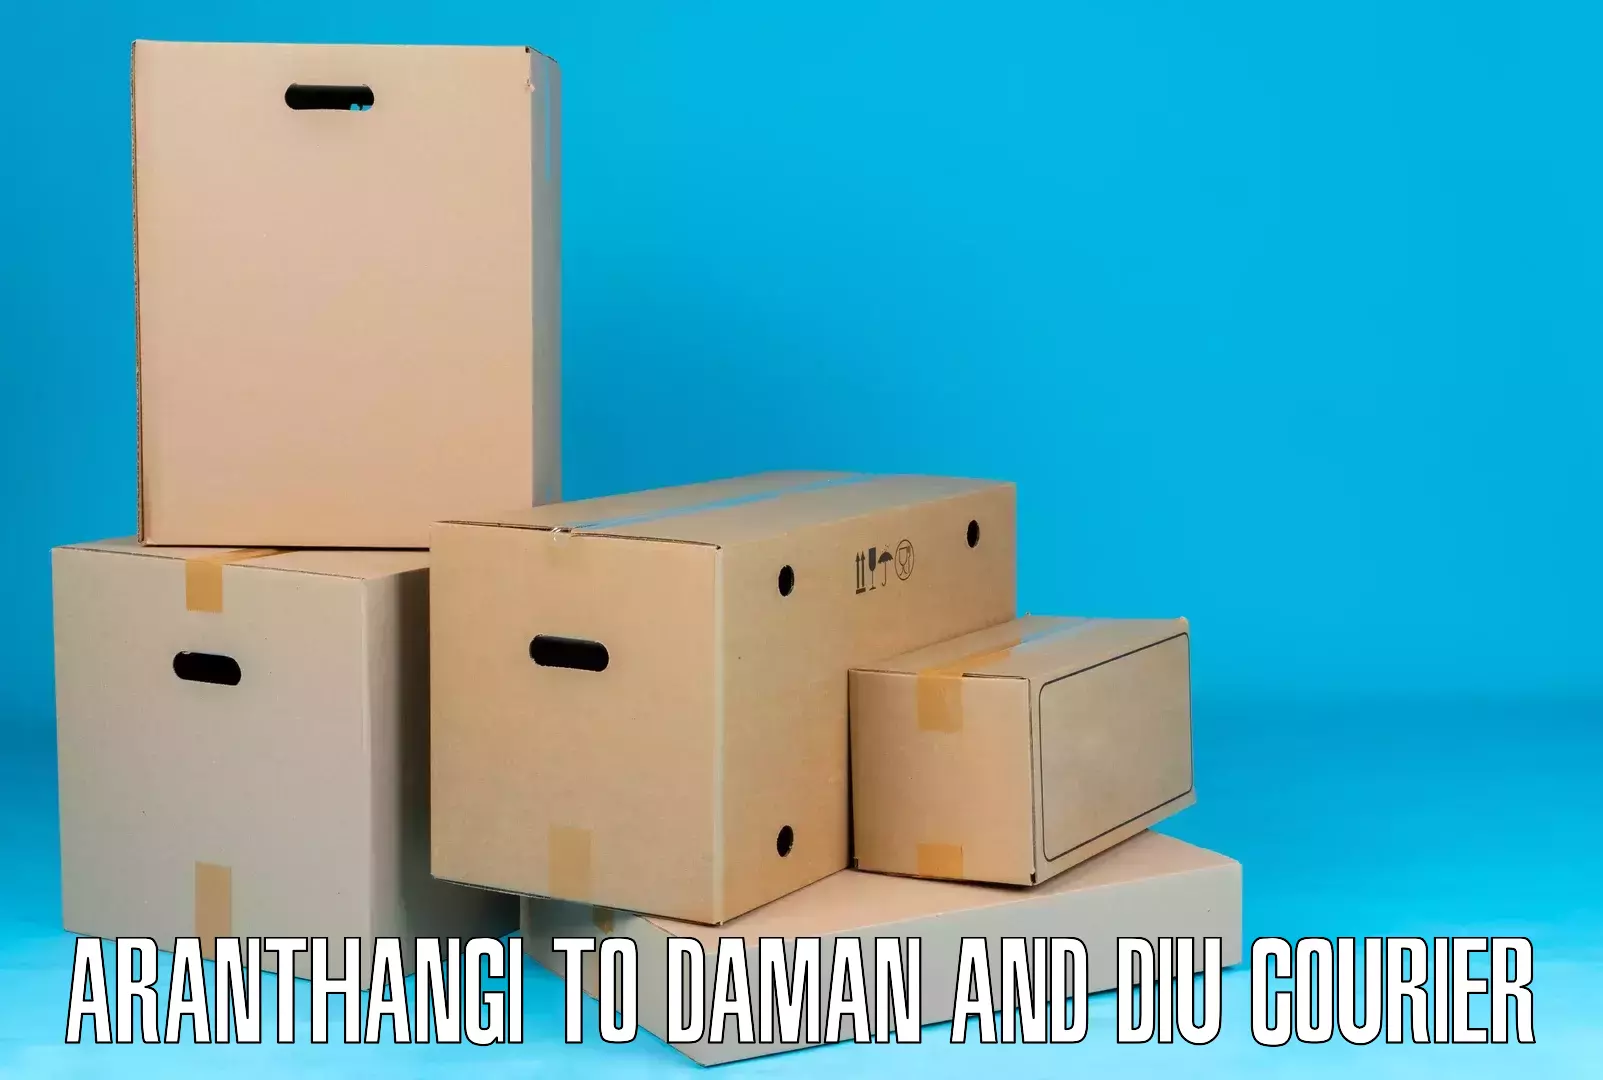 Enhanced shipping experience in Aranthangi to Daman and Diu